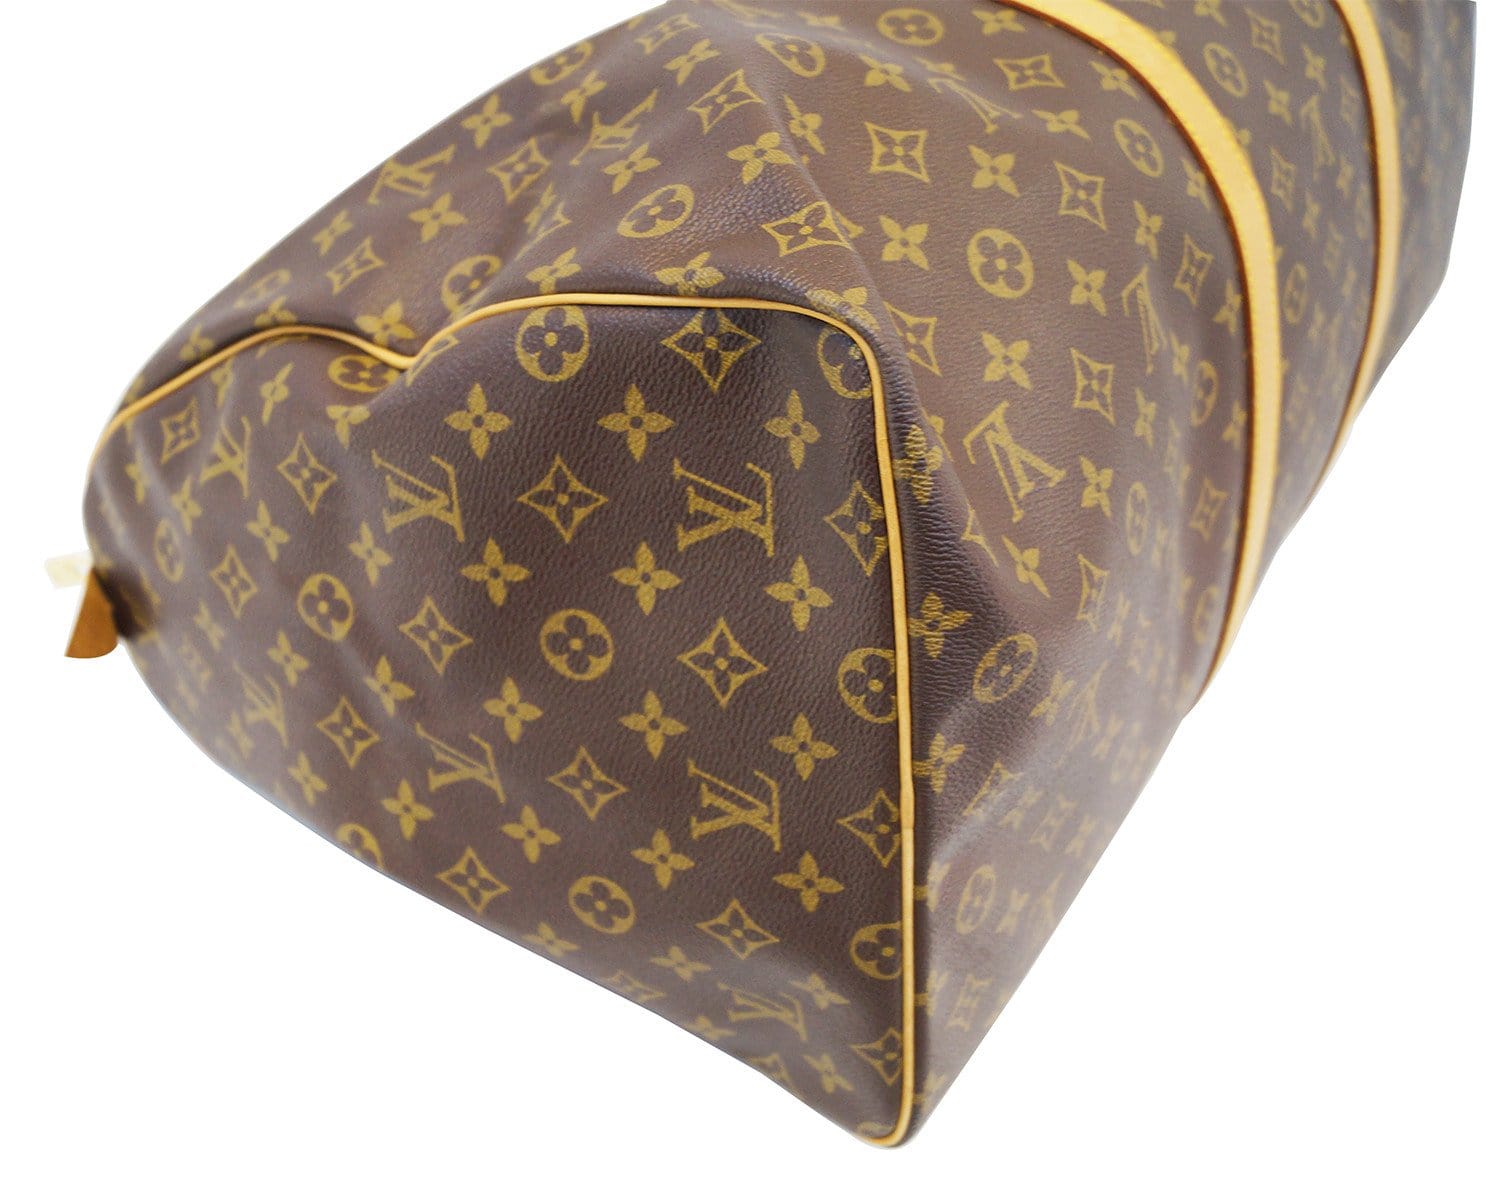 Louis Vuitton Keepall 60 Bandoulier Weekend travel bag – JOY'S CLASSY  COLLECTION